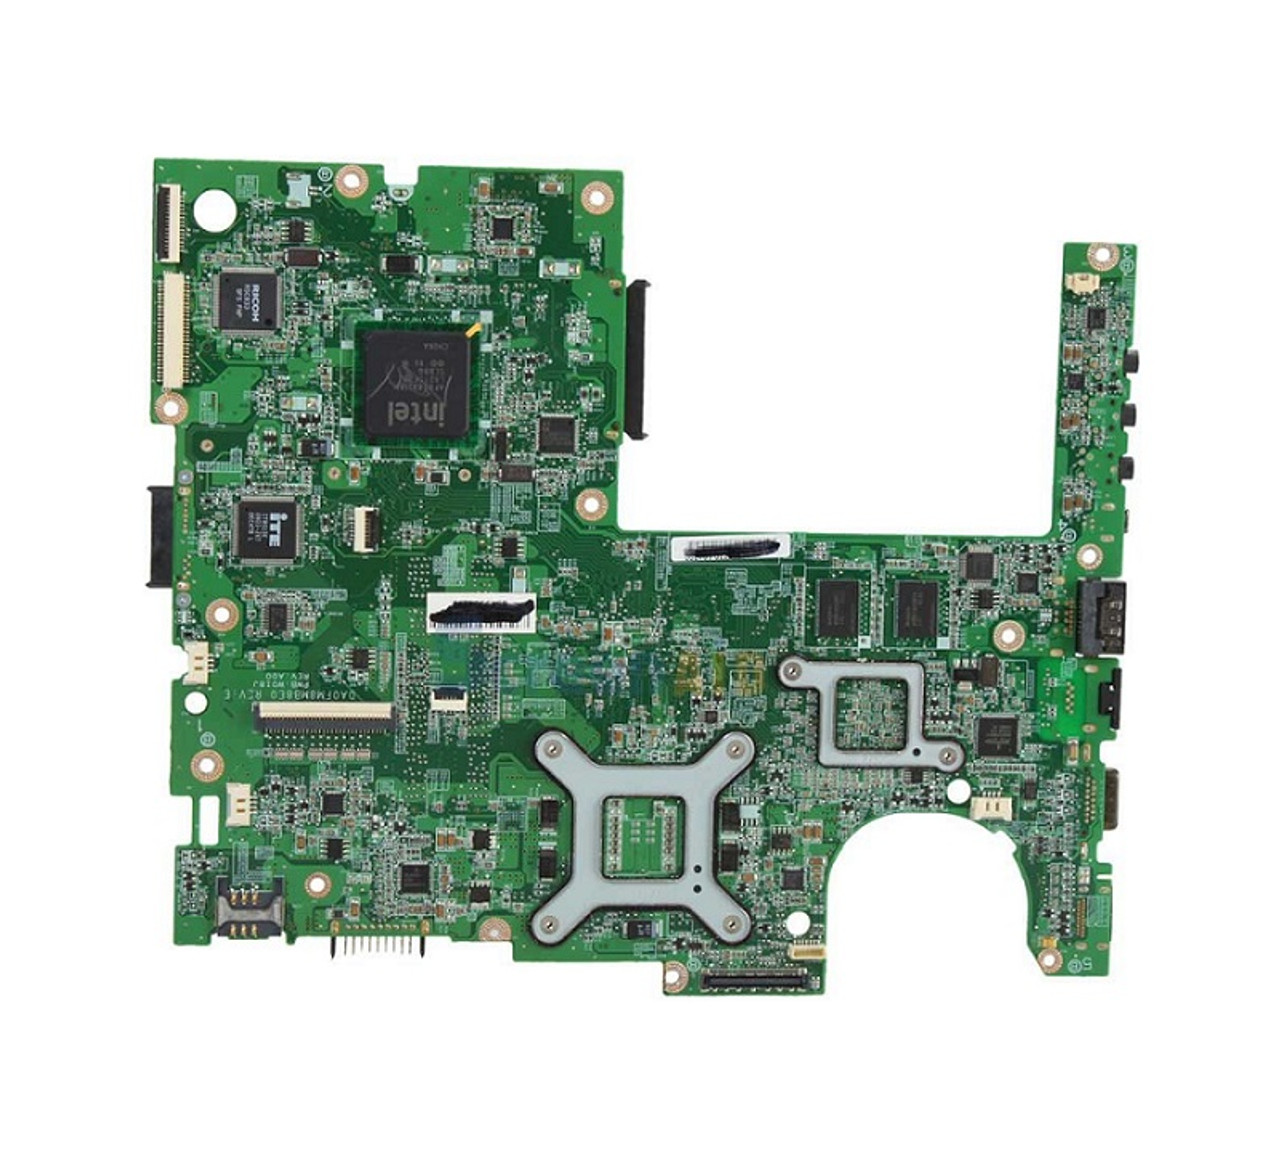 A1864083A - Sony VPC-SC41 Laptop Motheboard MBX-237 with i5-2450M 2.5GHz (Refurbished)